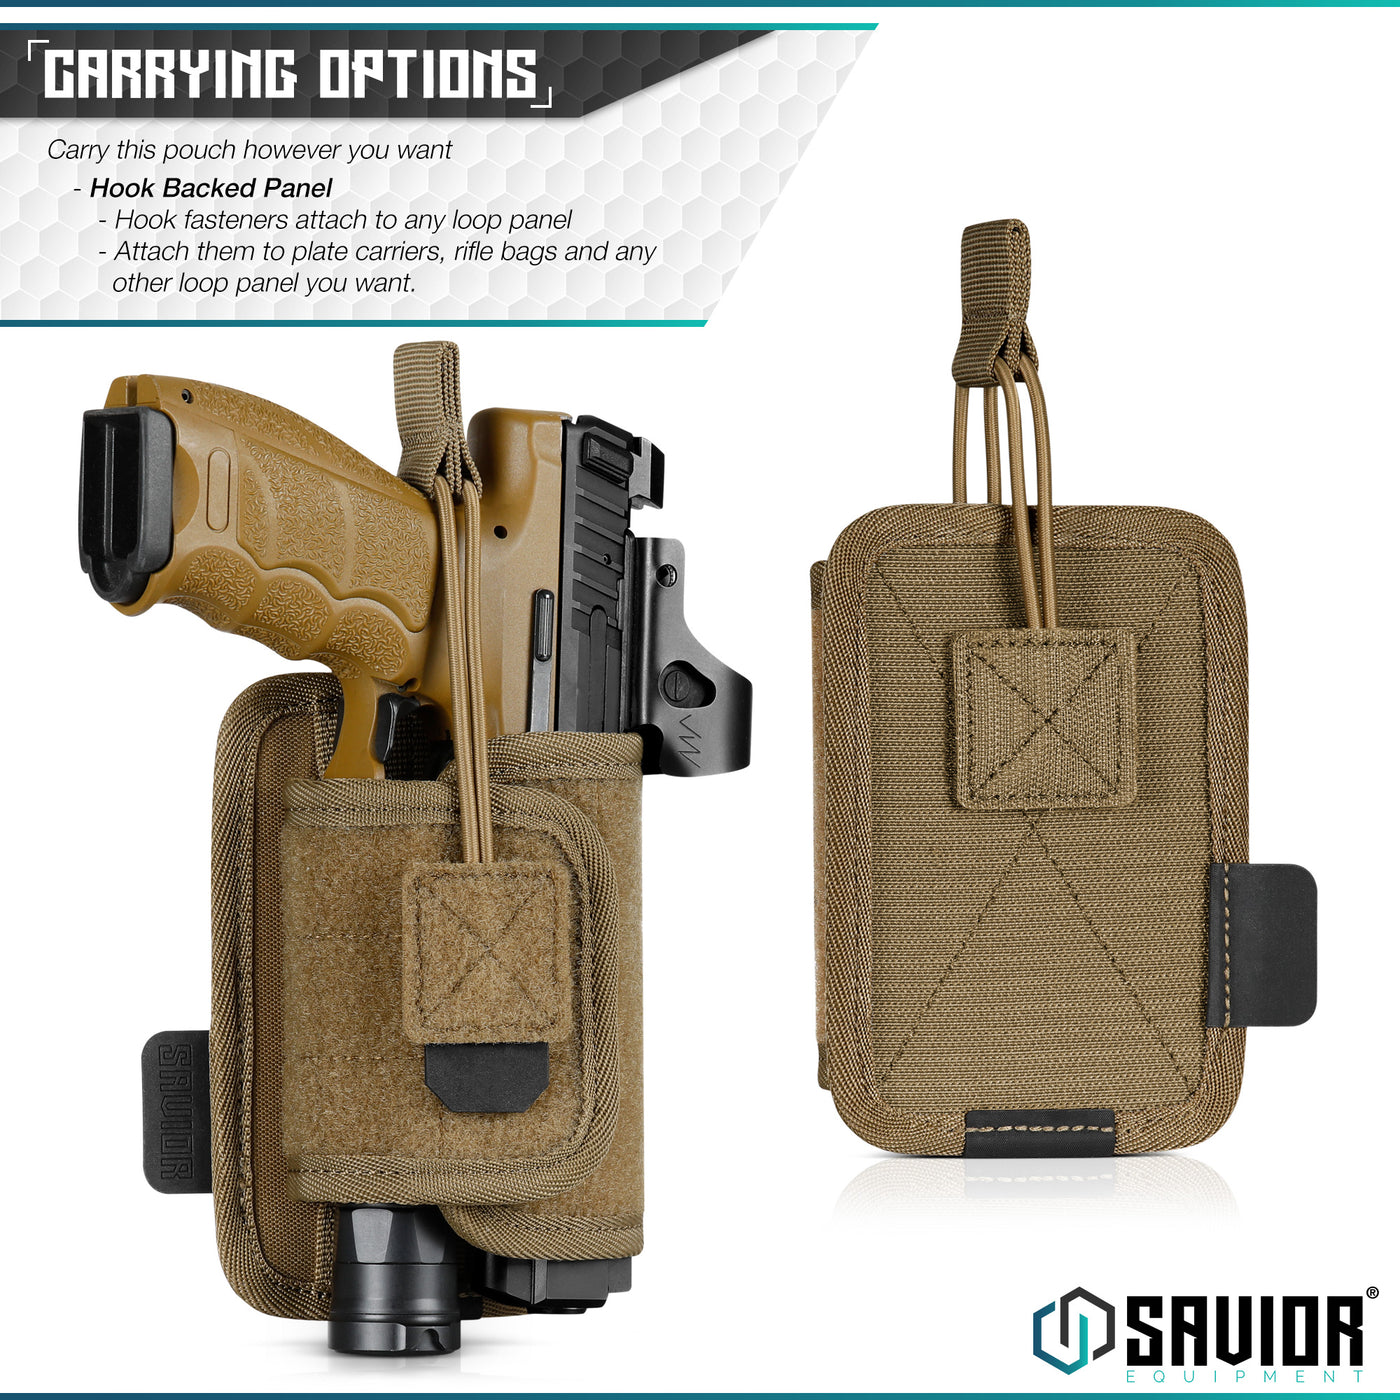 Multiple Carrying Options - Carry this holster however you want. Hook backed panel. Hook fasteners atach to any loop panel. Attach them to plate carriers, rifle bags and any other loop panel you want.